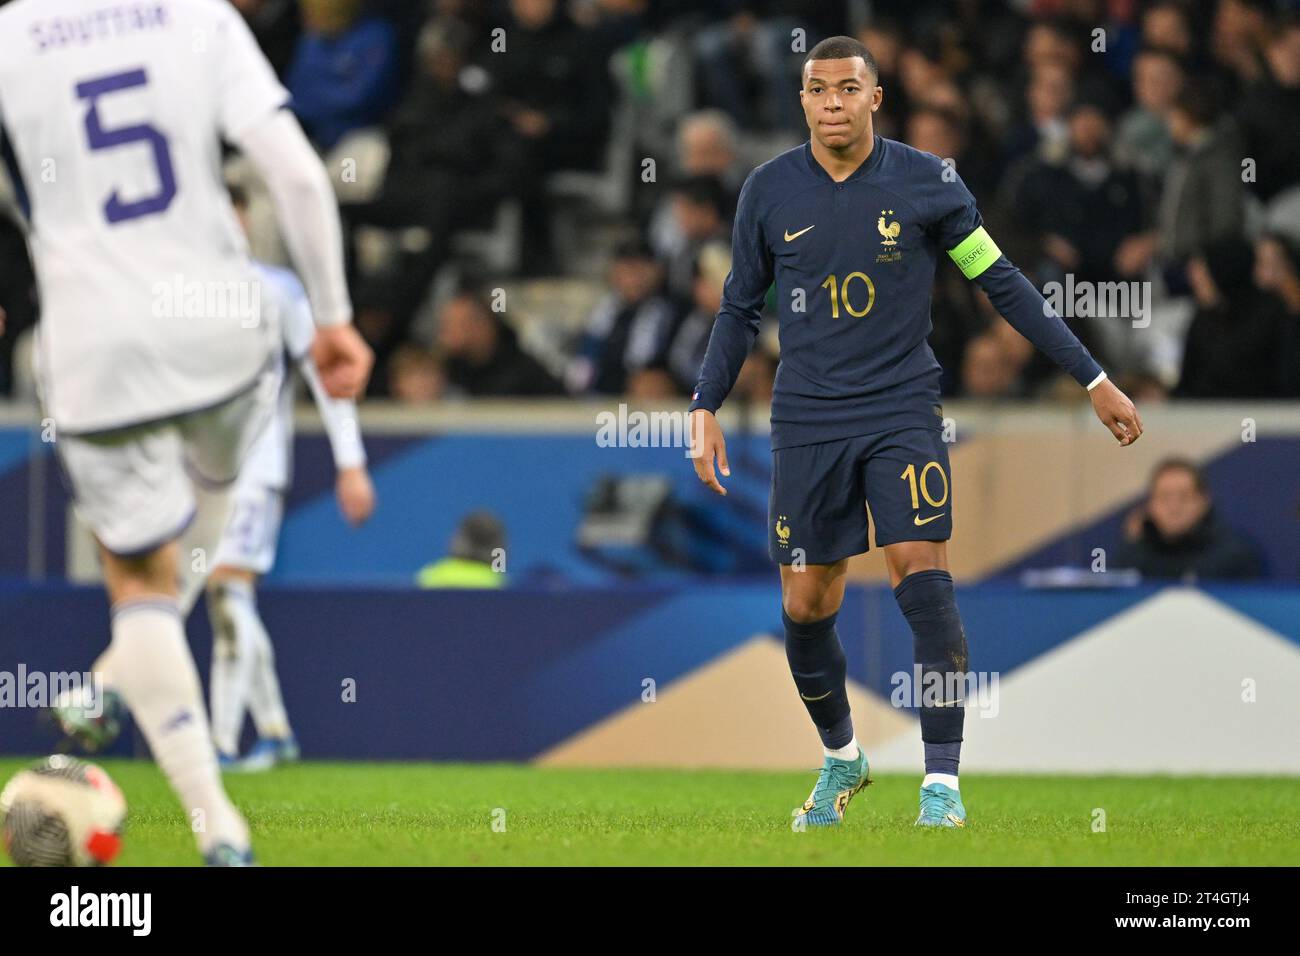 Kylian Mbappe (10) of France pictured during a soccer game between the national teams of France and Scotland in friendly game, on October 17 , 2023 in Lille, France. (Photo by David Catry / Sportpix) Stock Photo